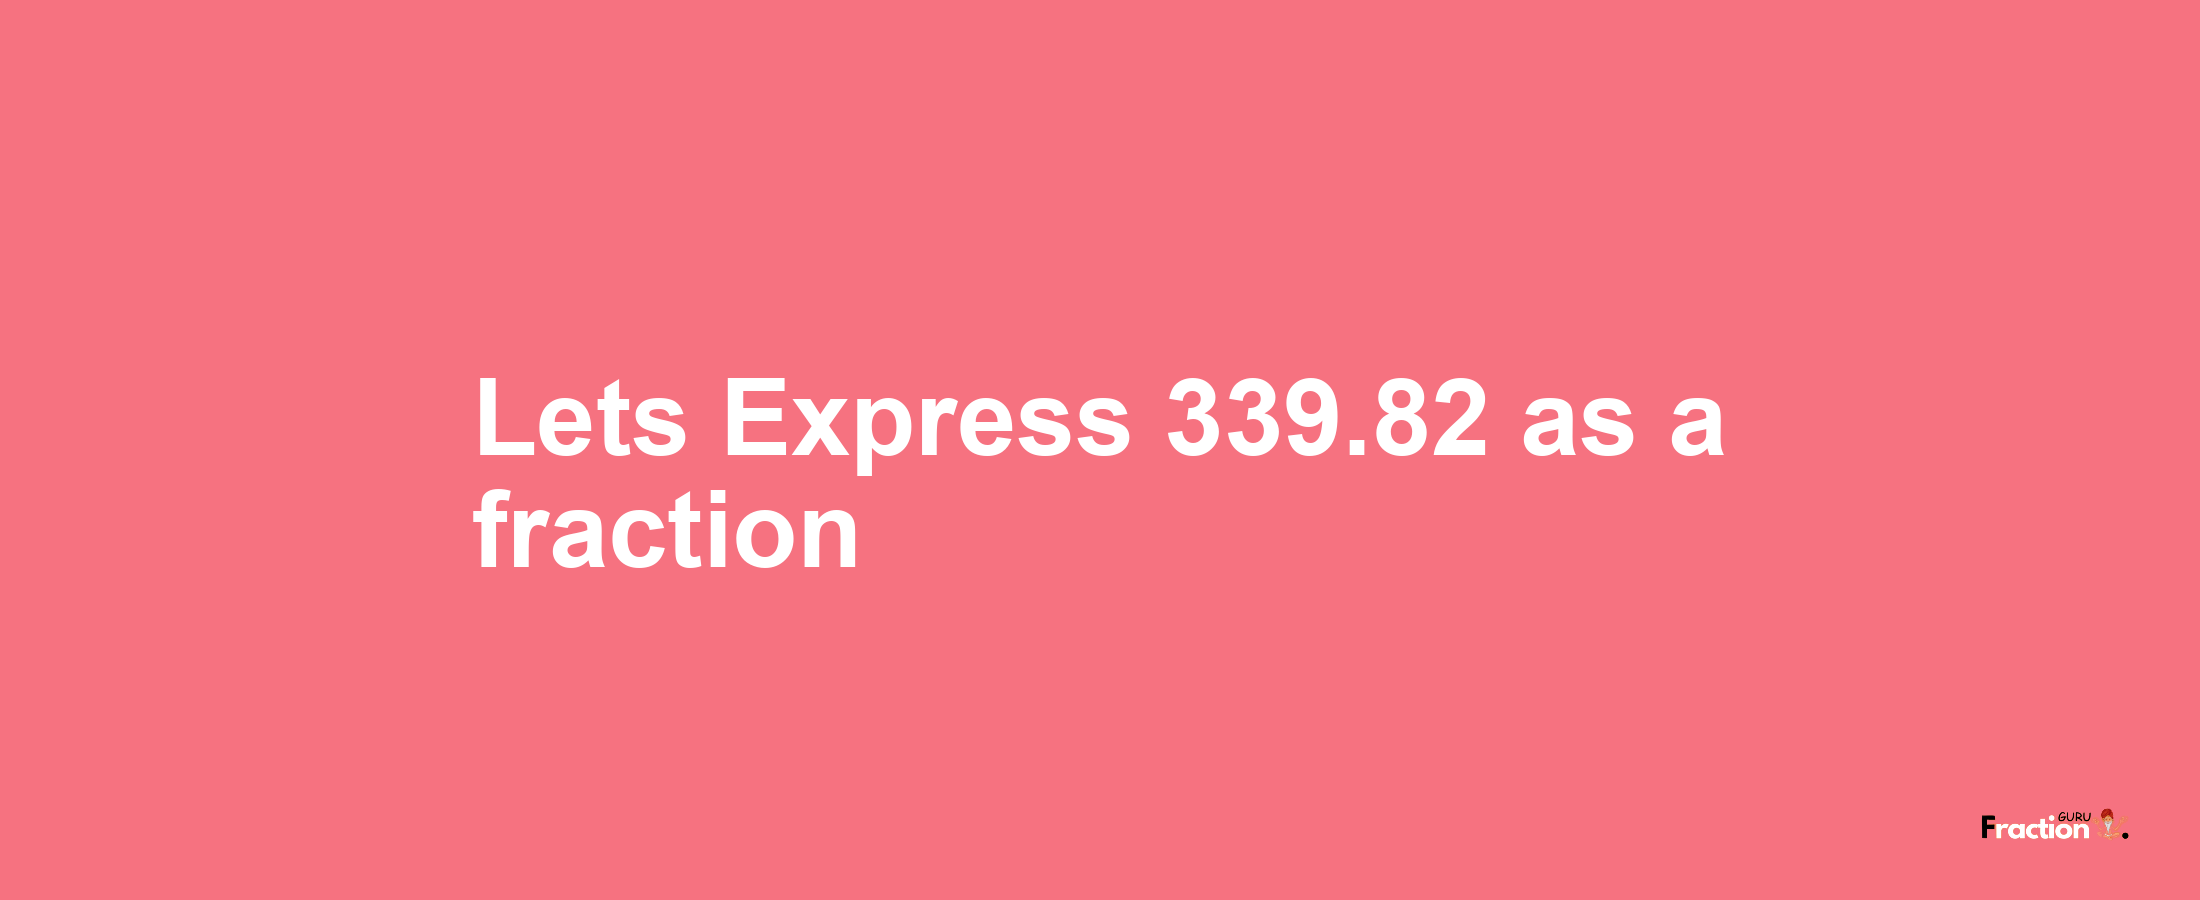 Lets Express 339.82 as afraction